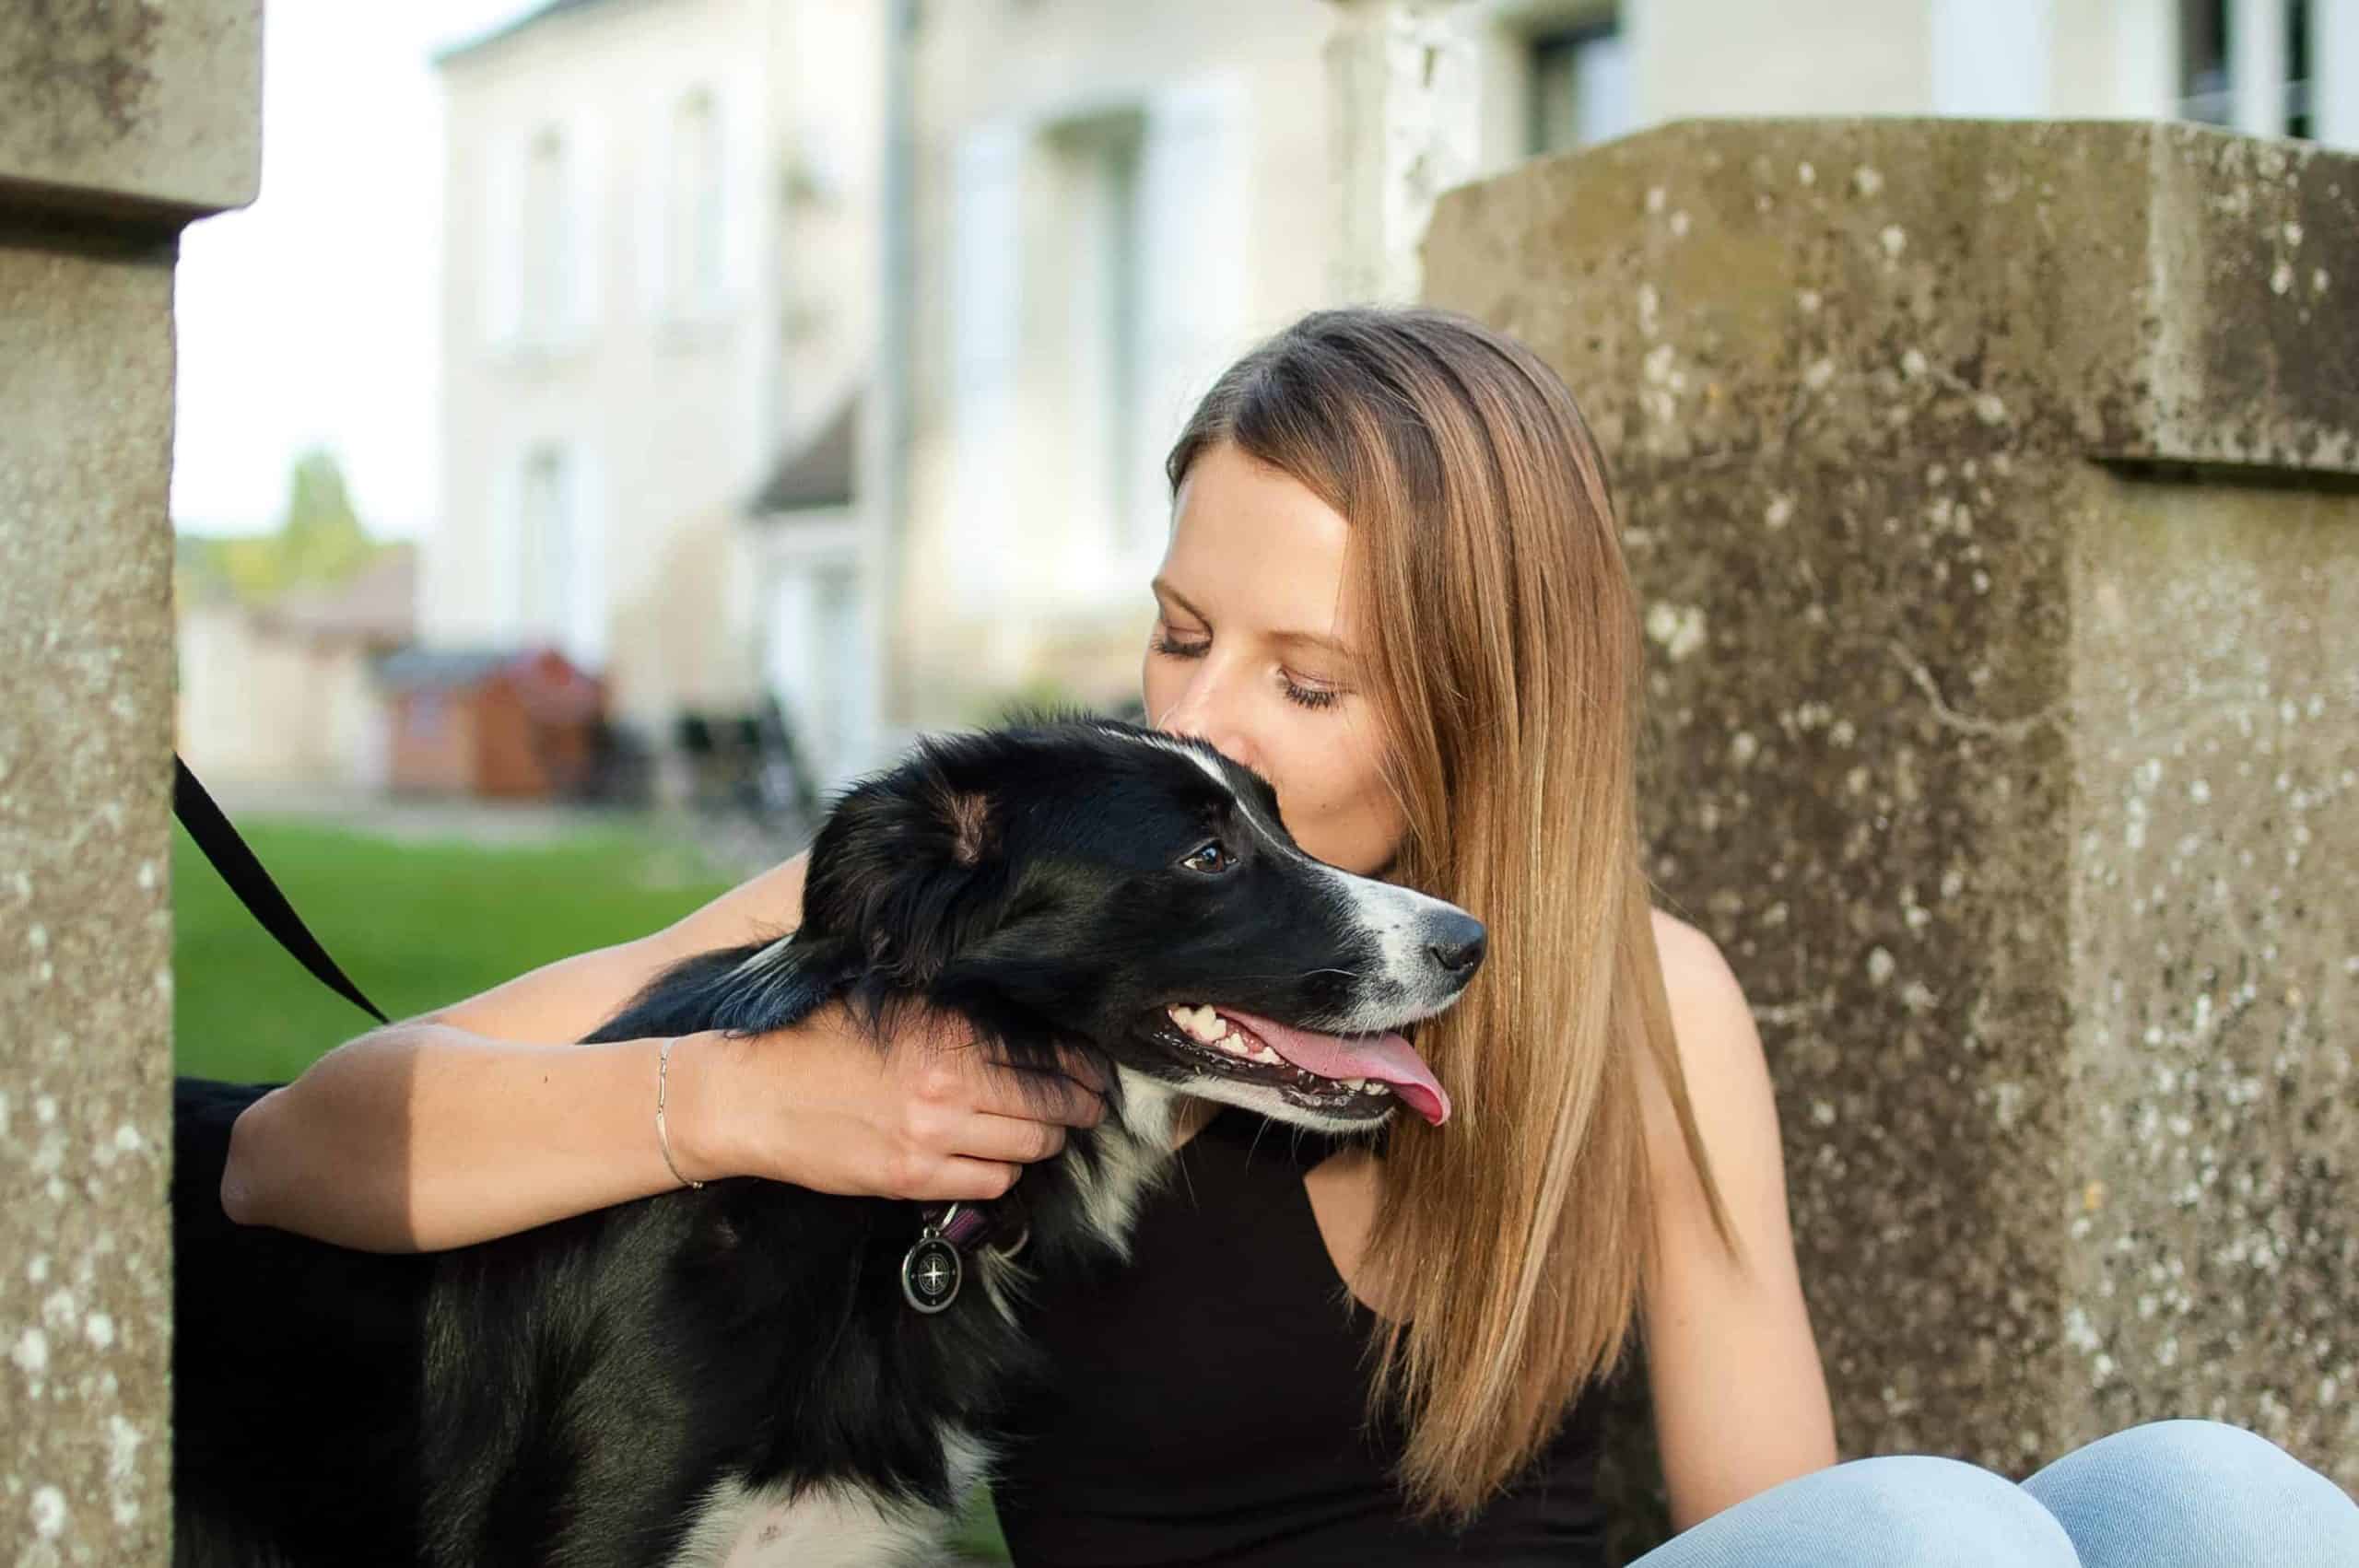 Woman kisses Border Collie. Under HUD's guidelines, licensed medical health professionals include primary care physicians, counselors, psychiatrists, social workers, nurse practitioners, nurses, and physician's assistants.